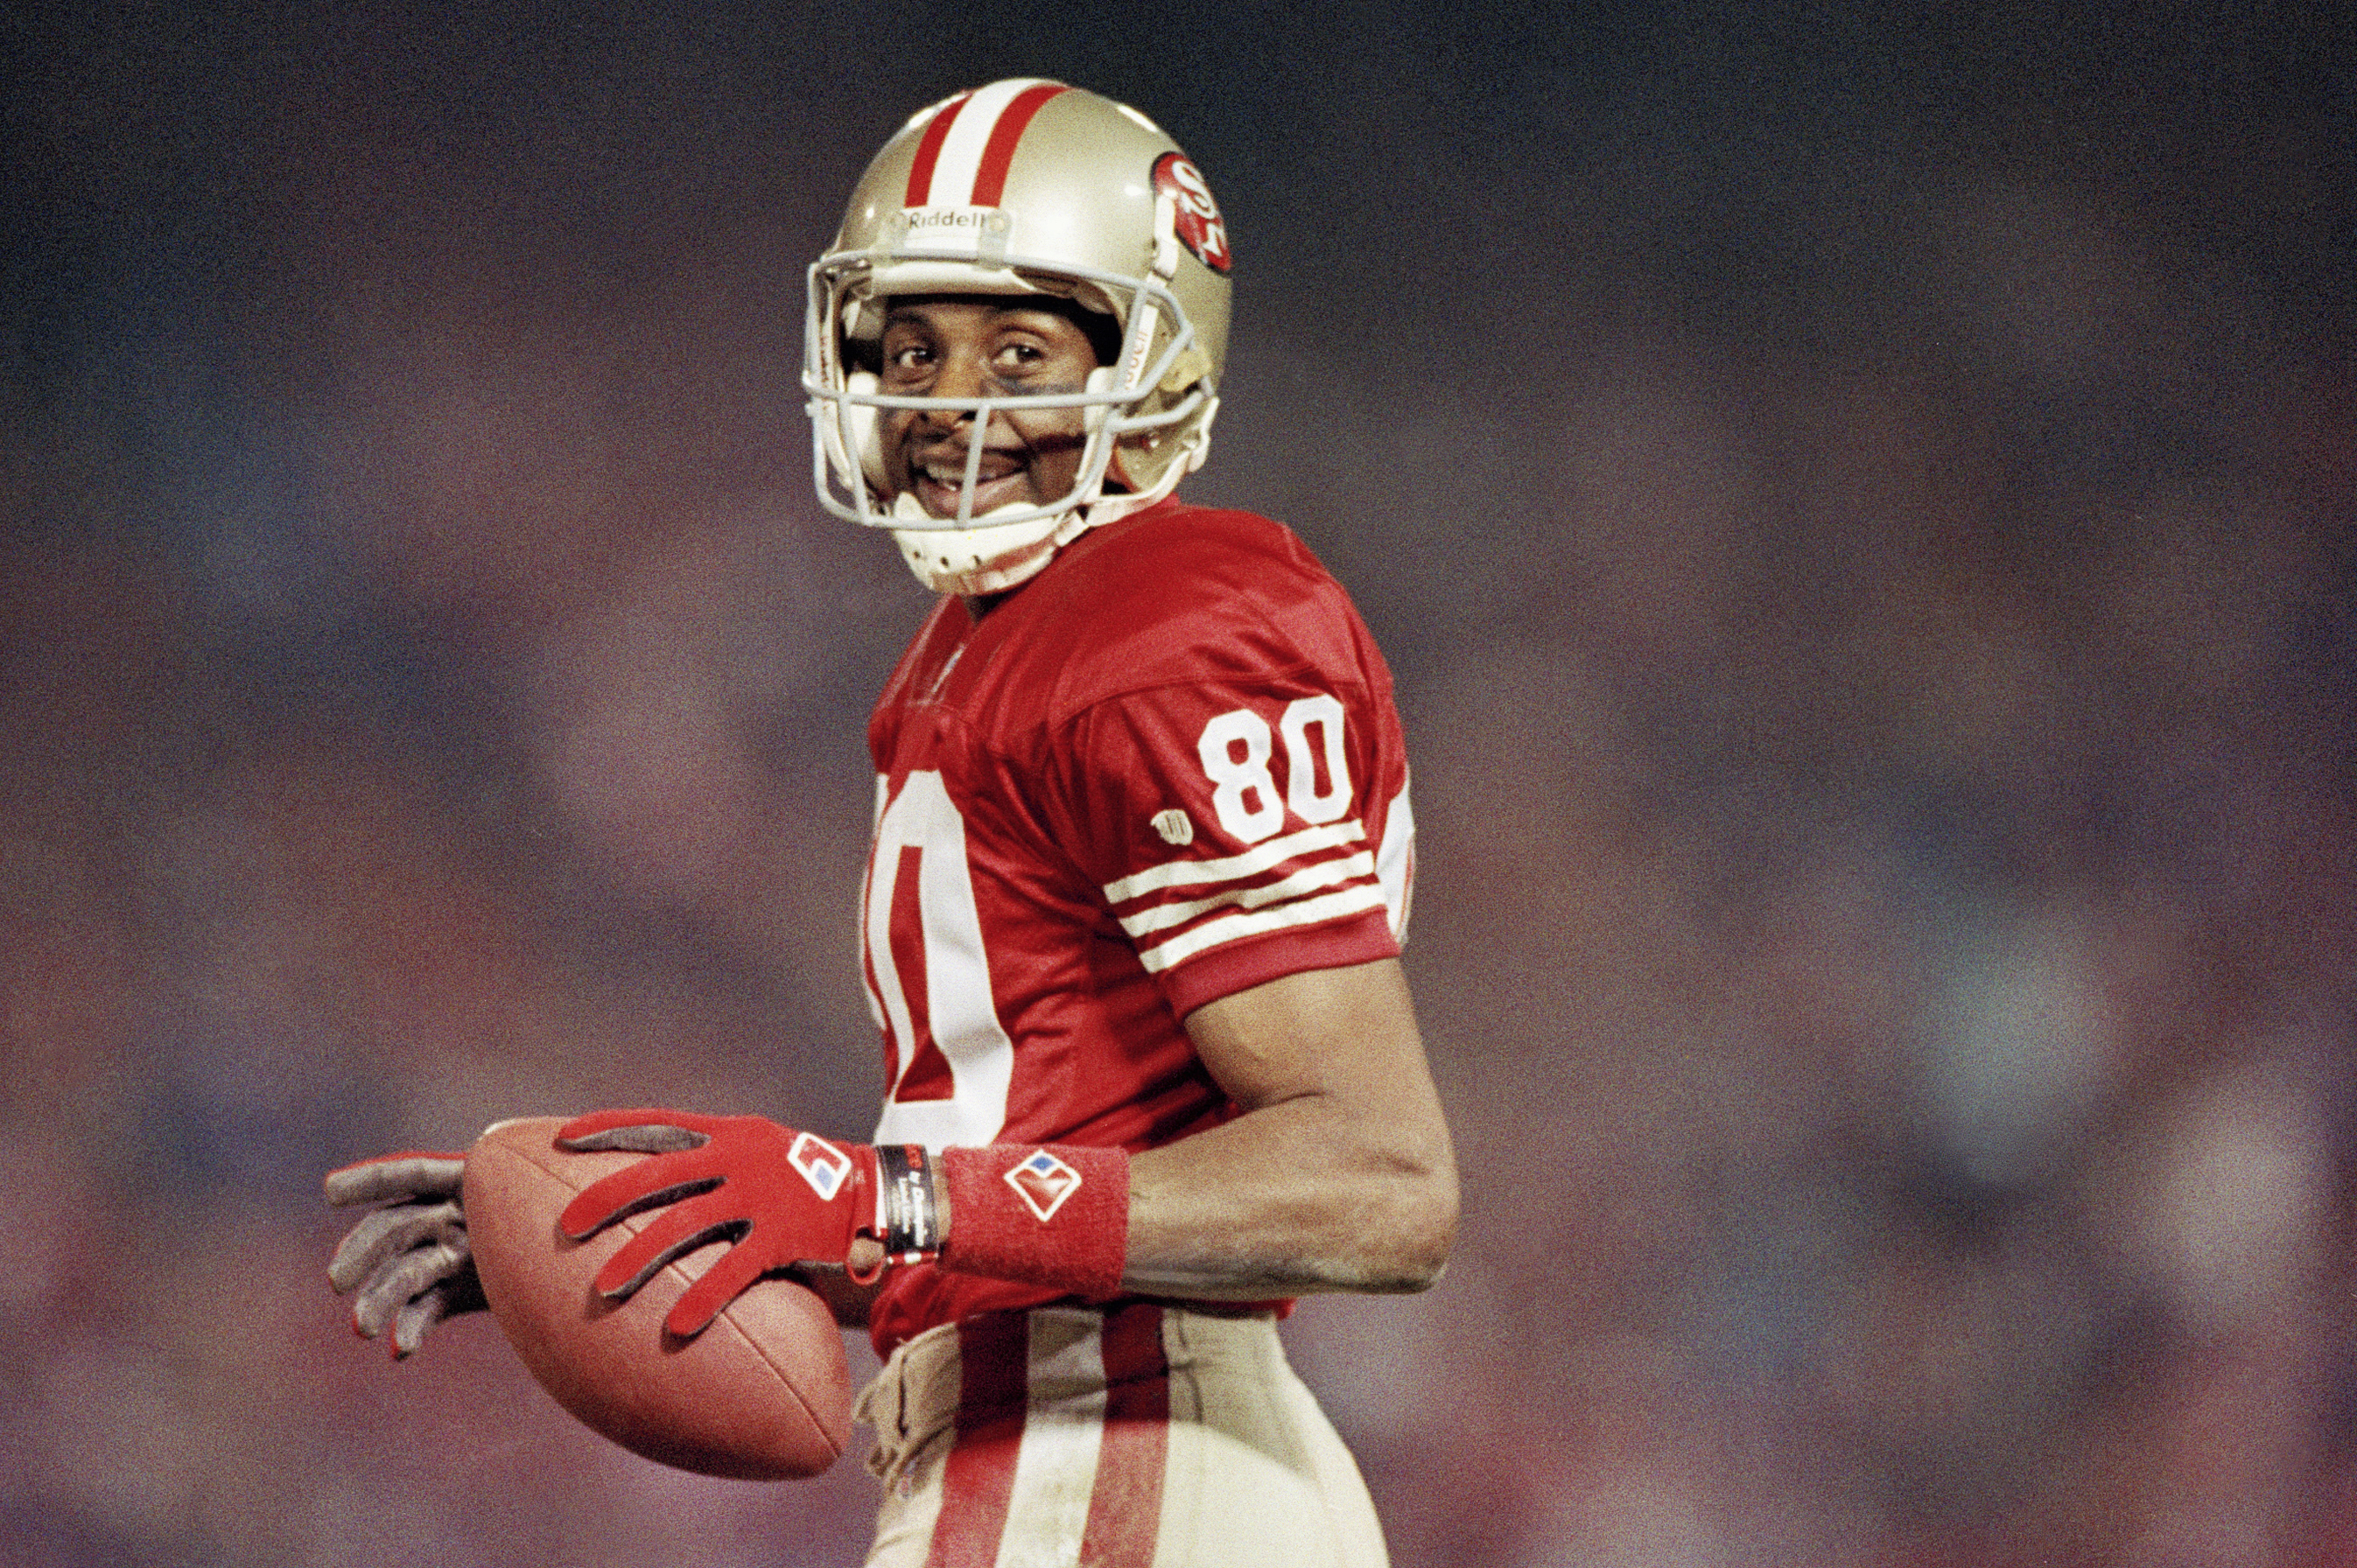 Roundtable: Who Are the Top 5 Receivers of All-Time?